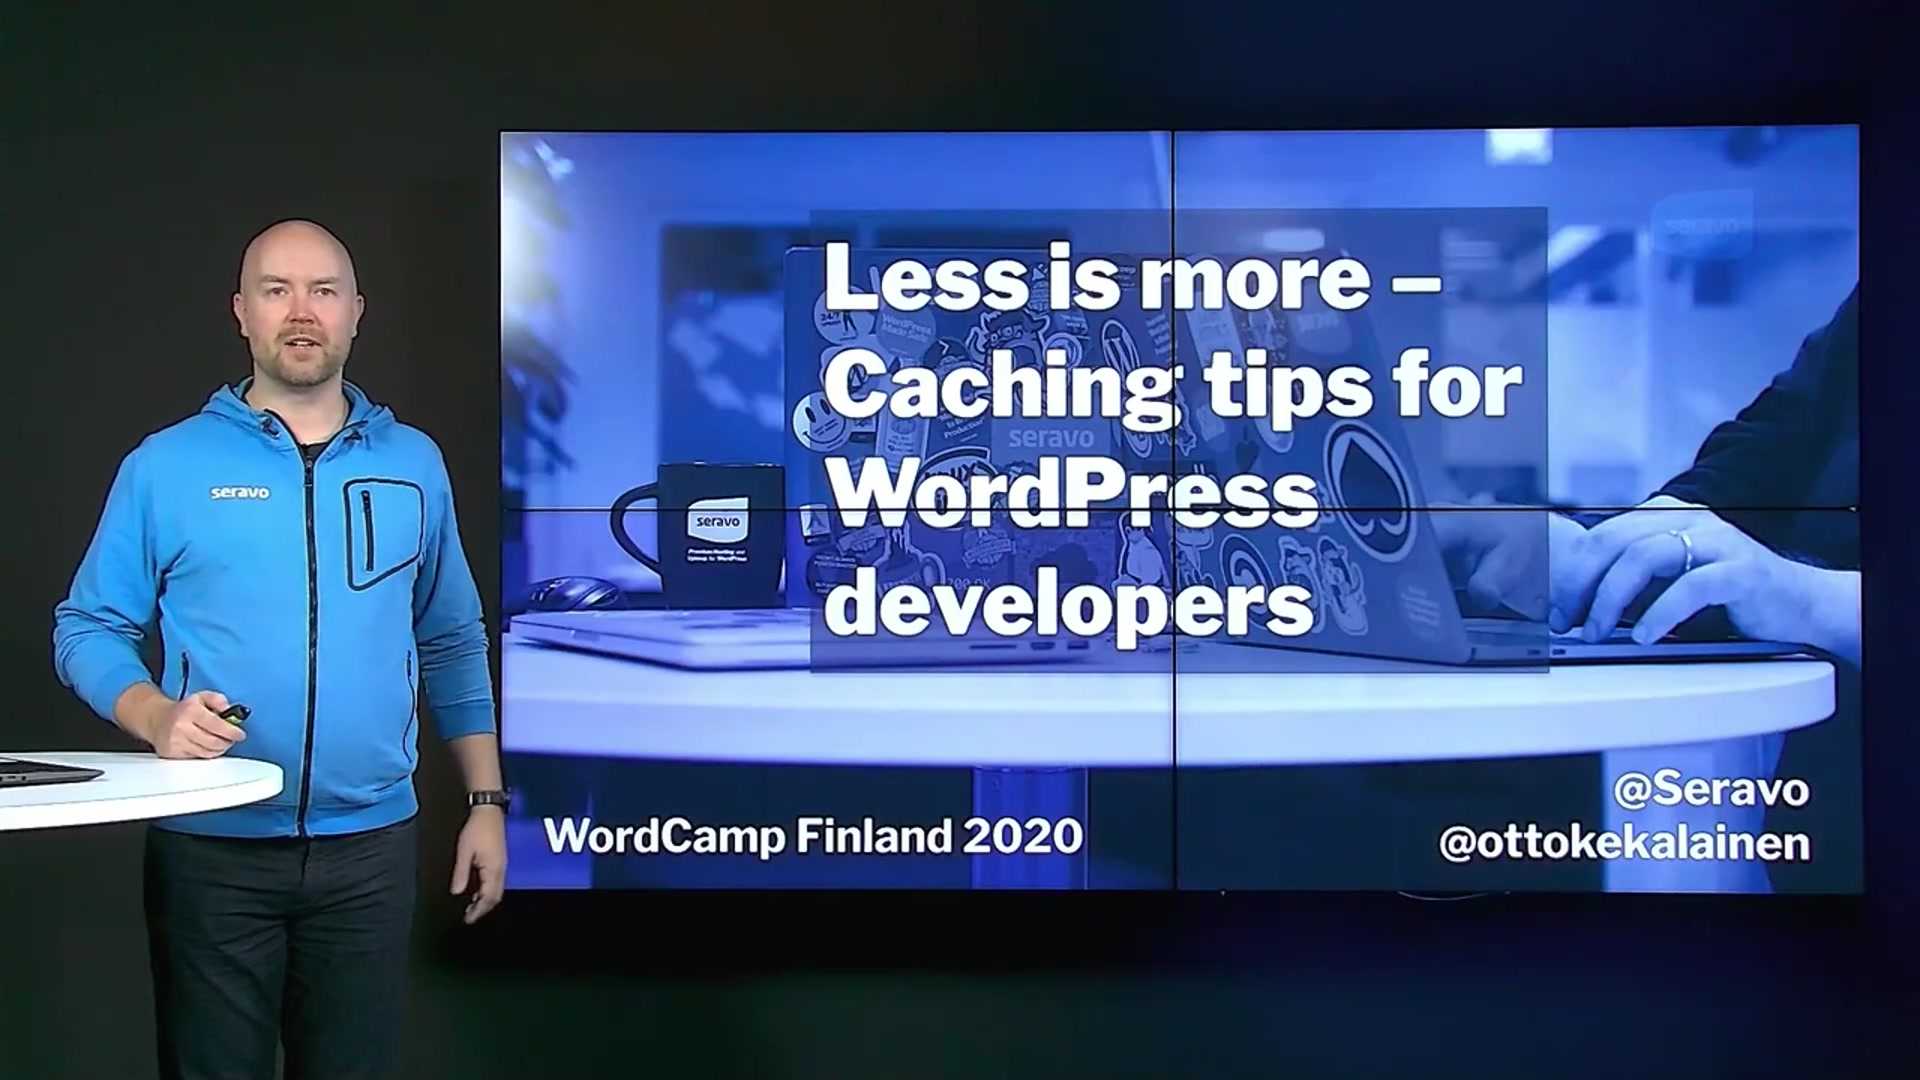 Otto Kekäläinen: Less is more – caching tips for WordPress developers